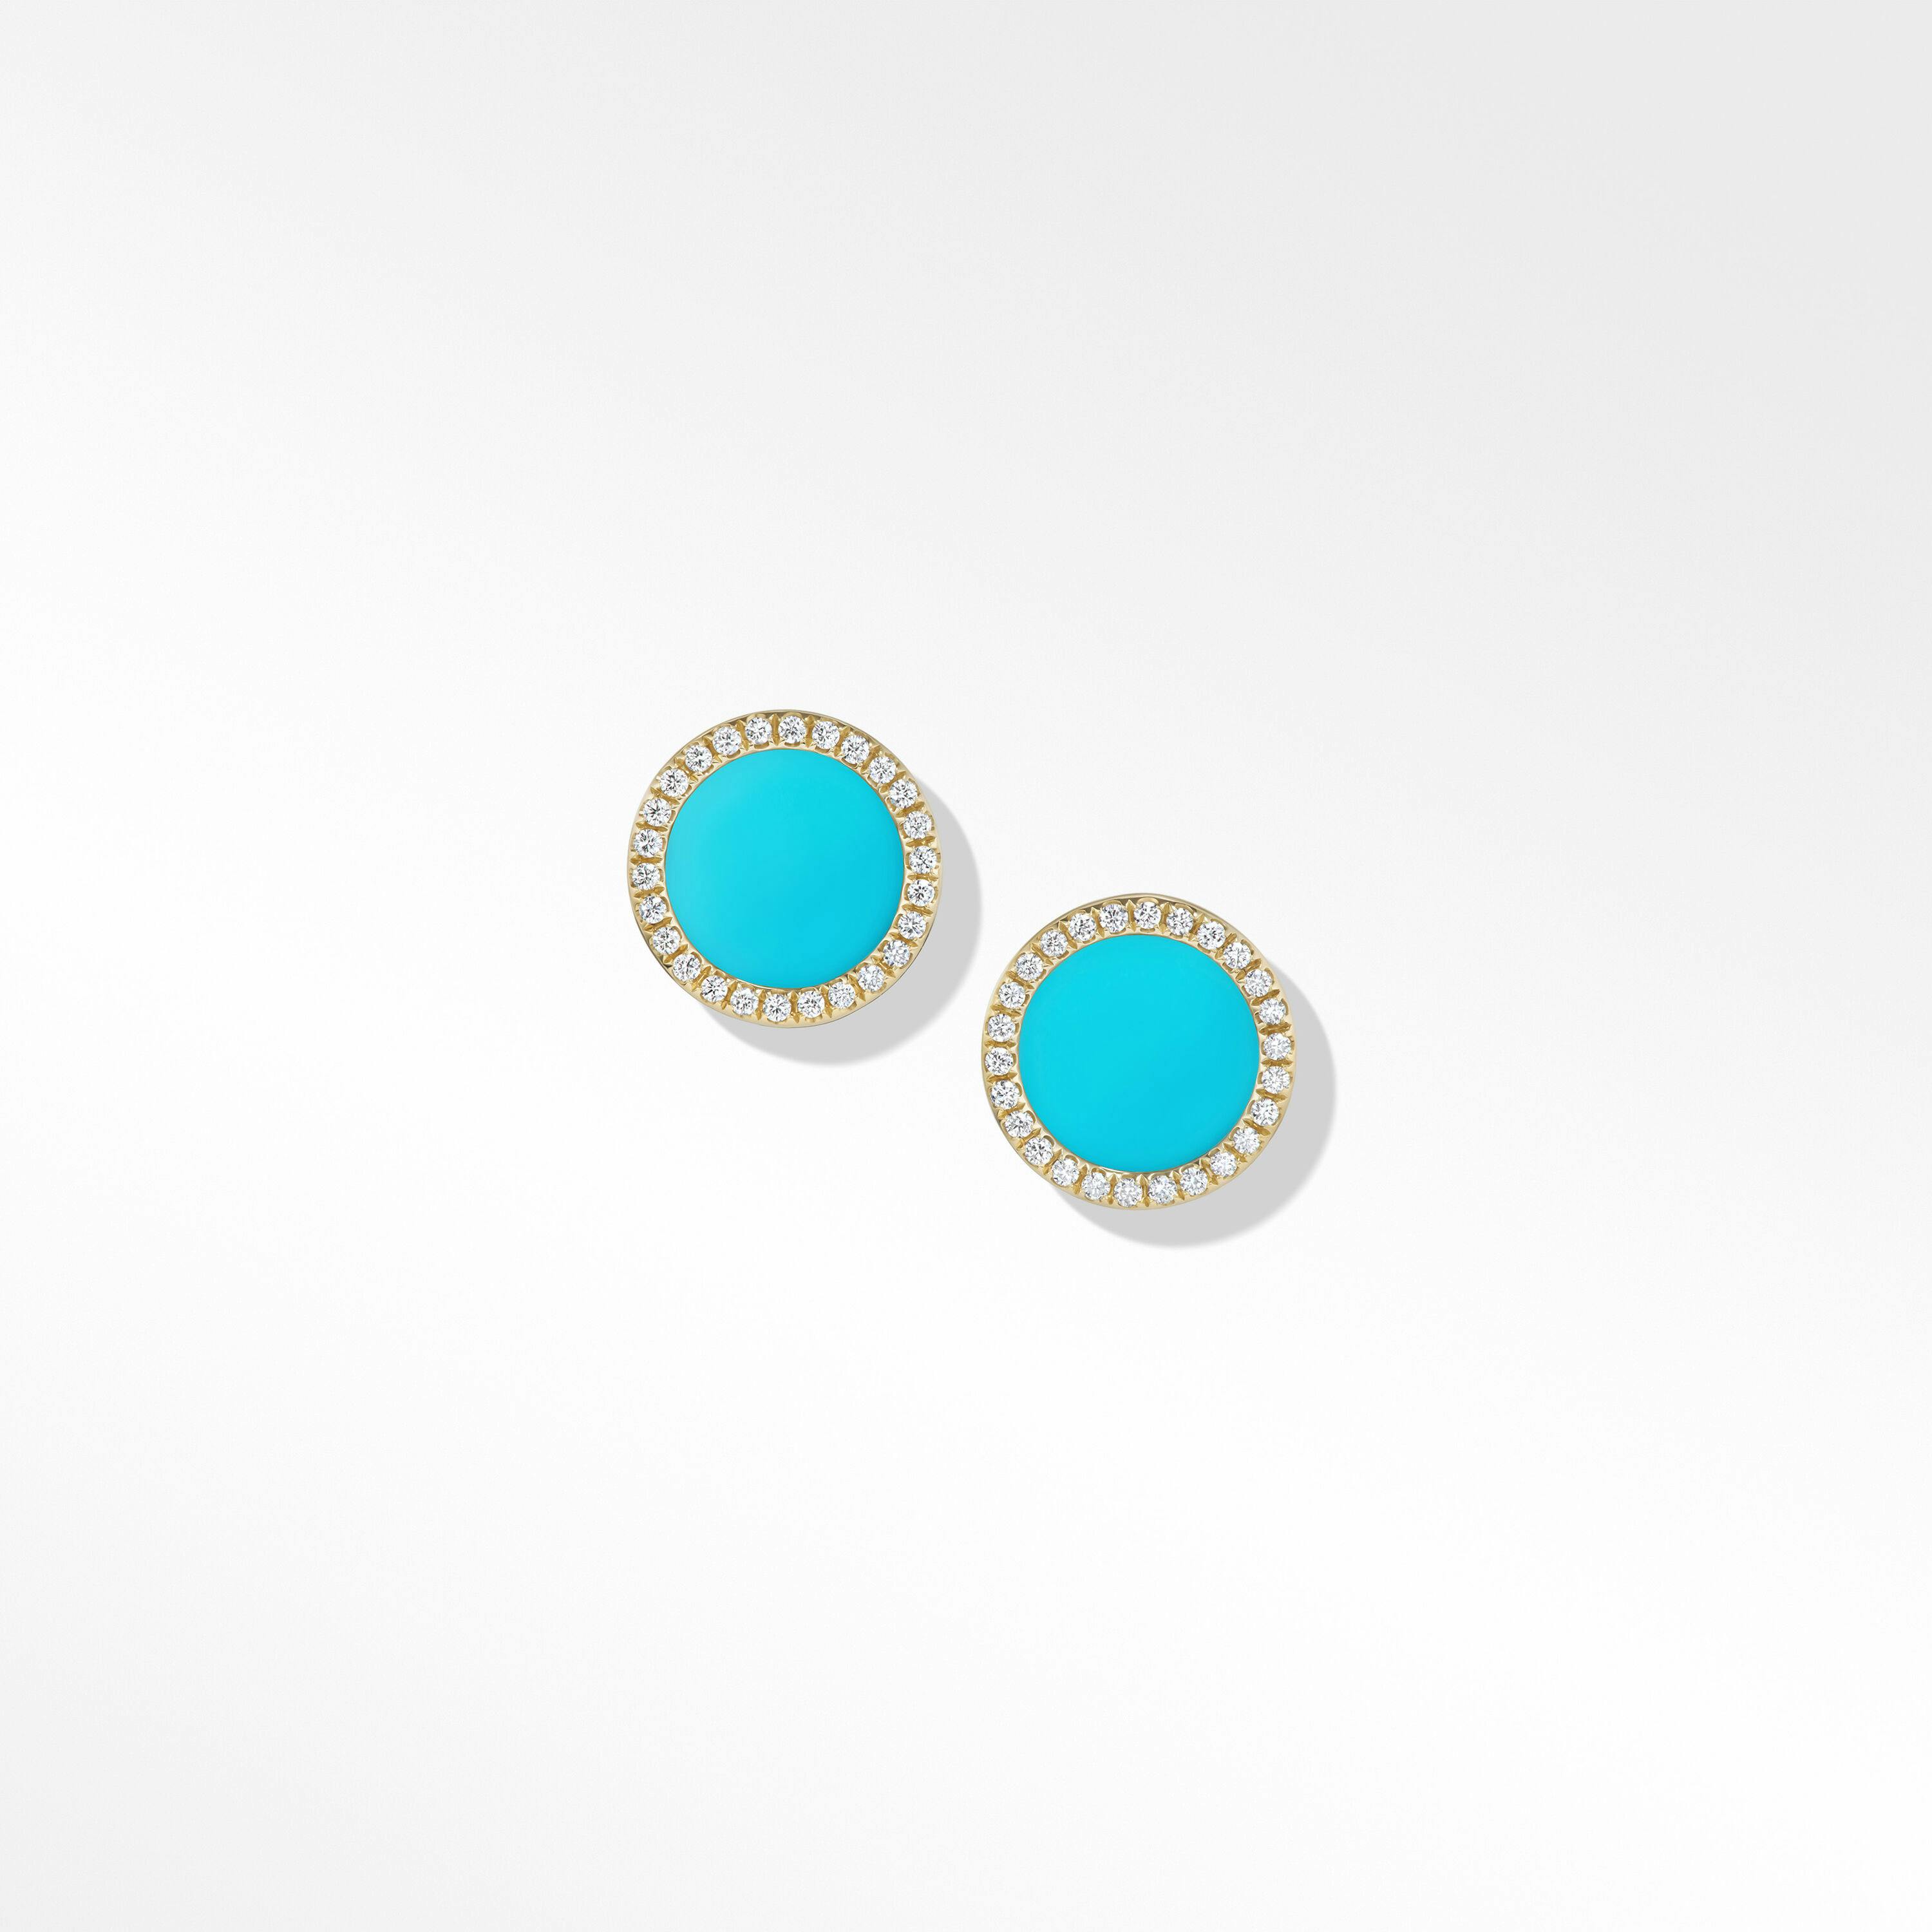 David Yurman Petite DY Elements Stud Earrings with Turquoise and Pave Diamonds